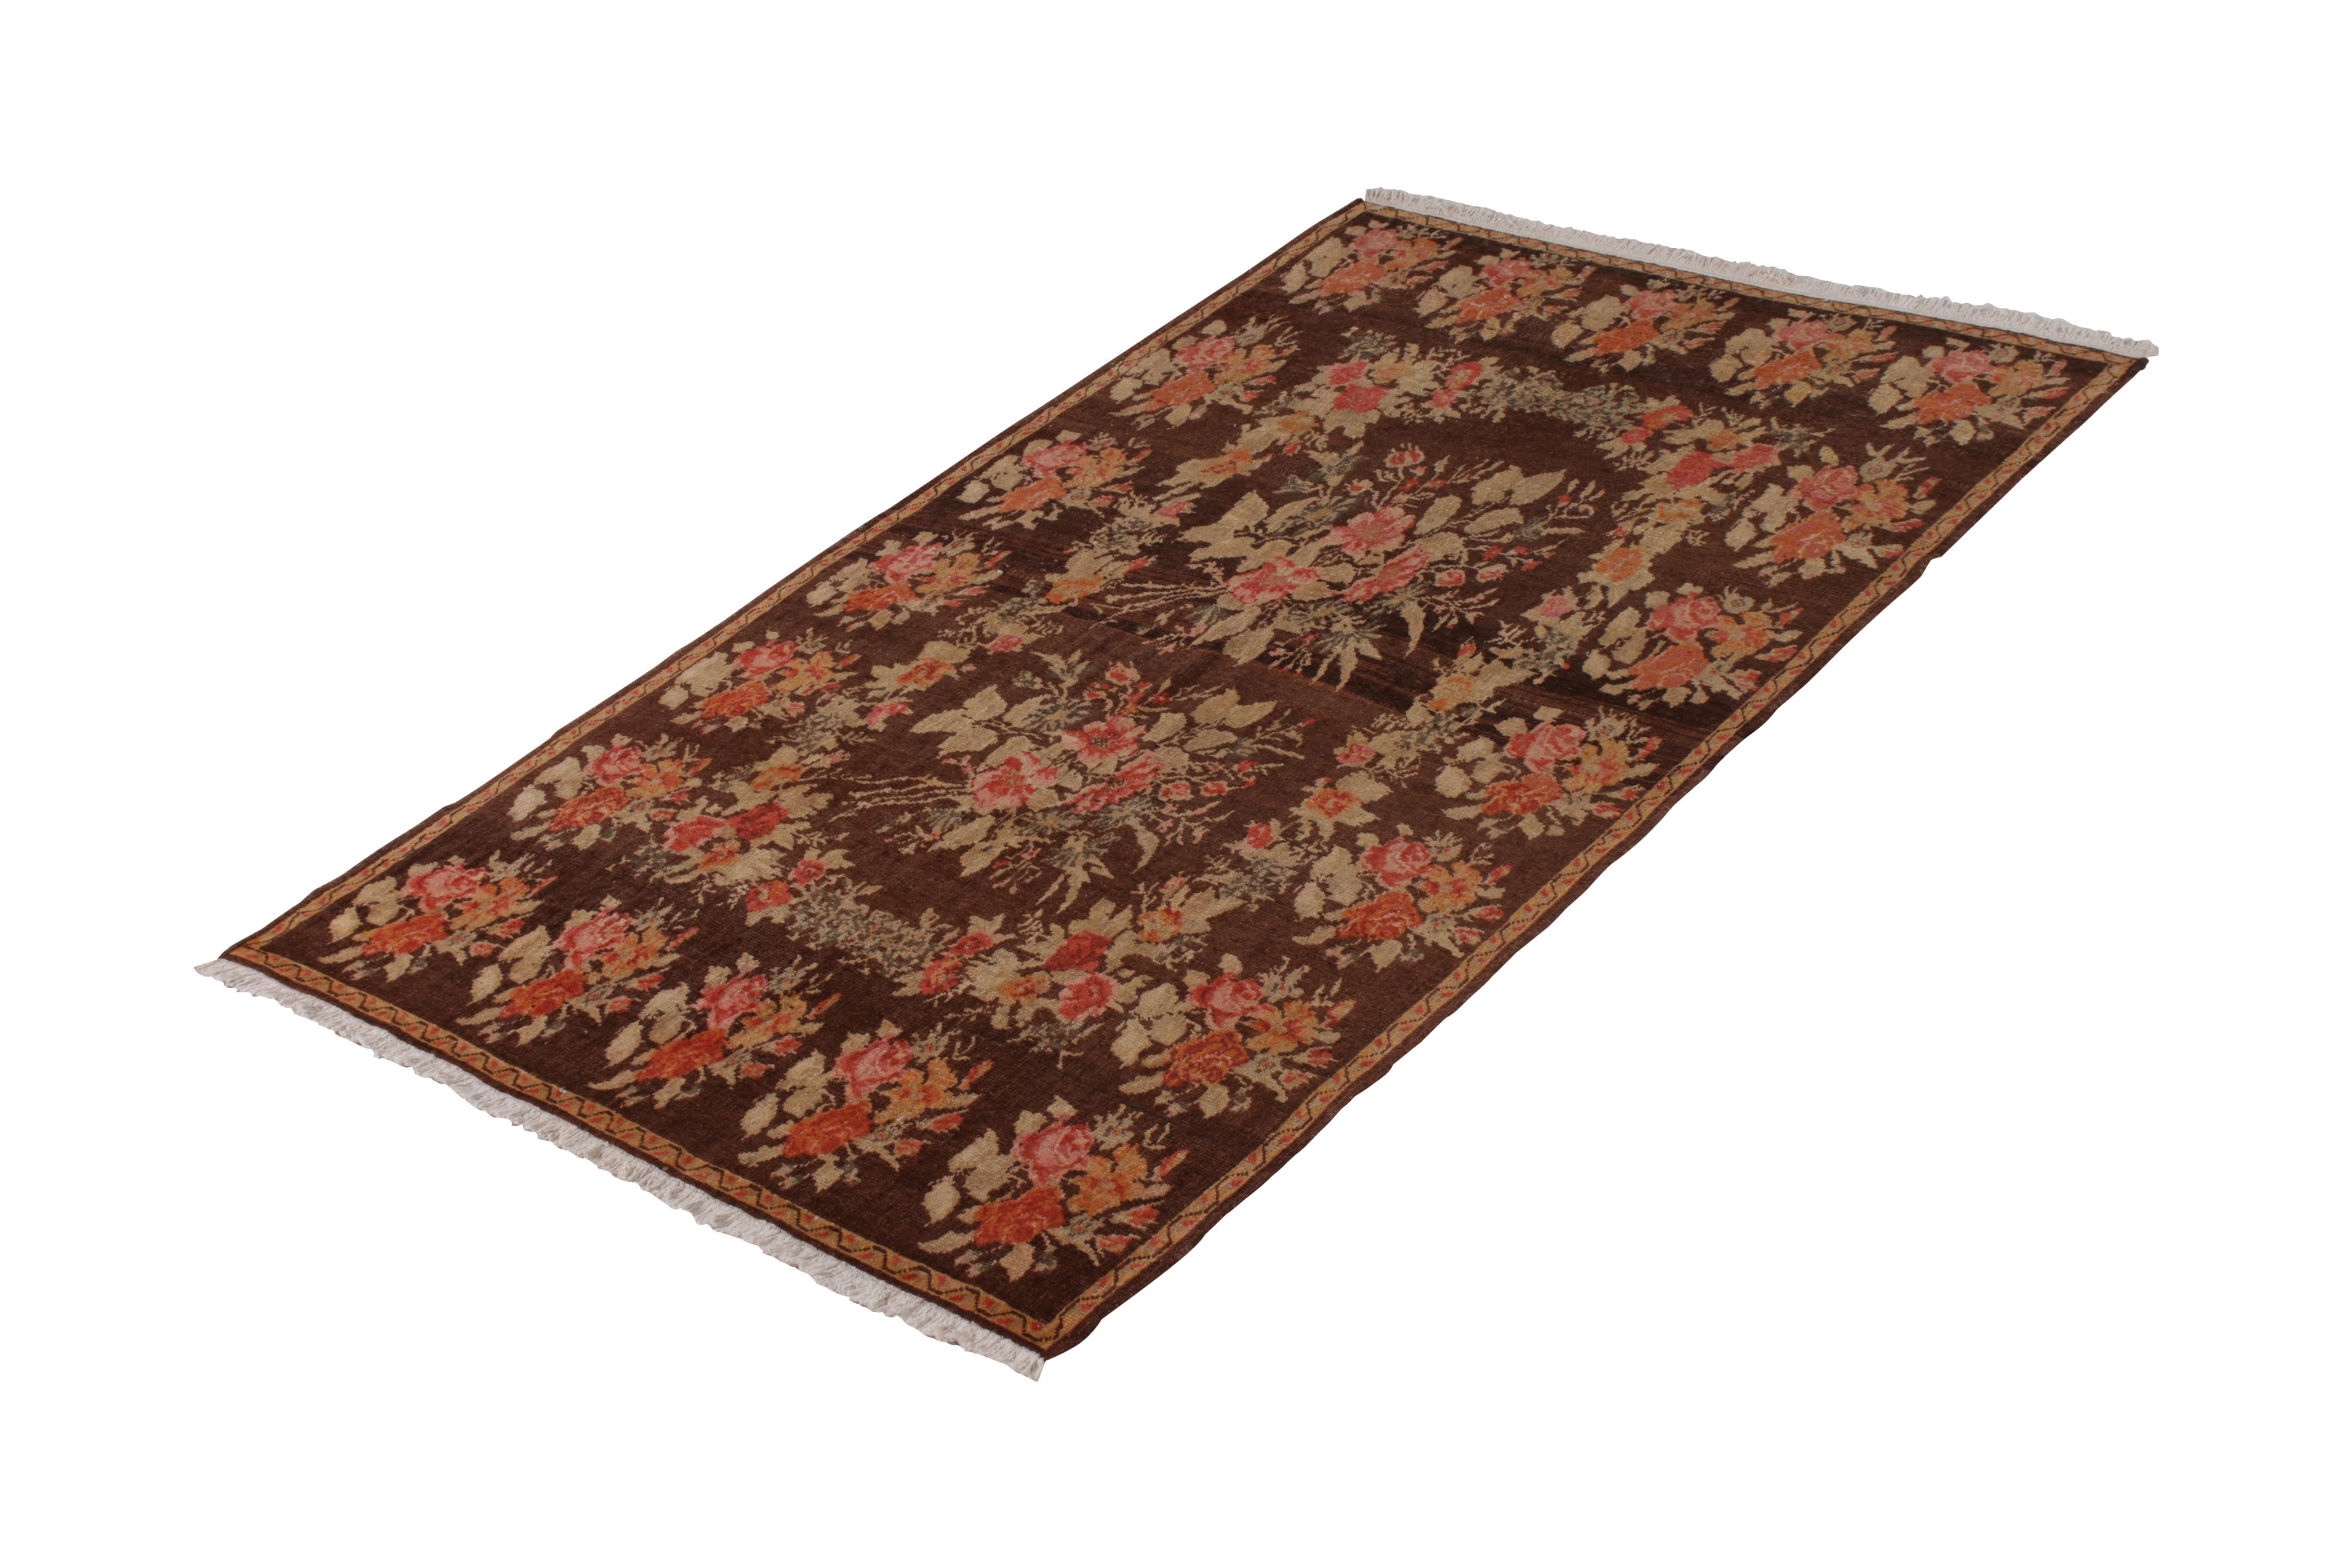 Hand knotted in wool pile originating from Turkey circa 1950-1960, this vintage rug connotes a midcentury Bessarabian rug design in the inspiration, likely remarking a nomadic influence in the piece signifying immediate European take on these